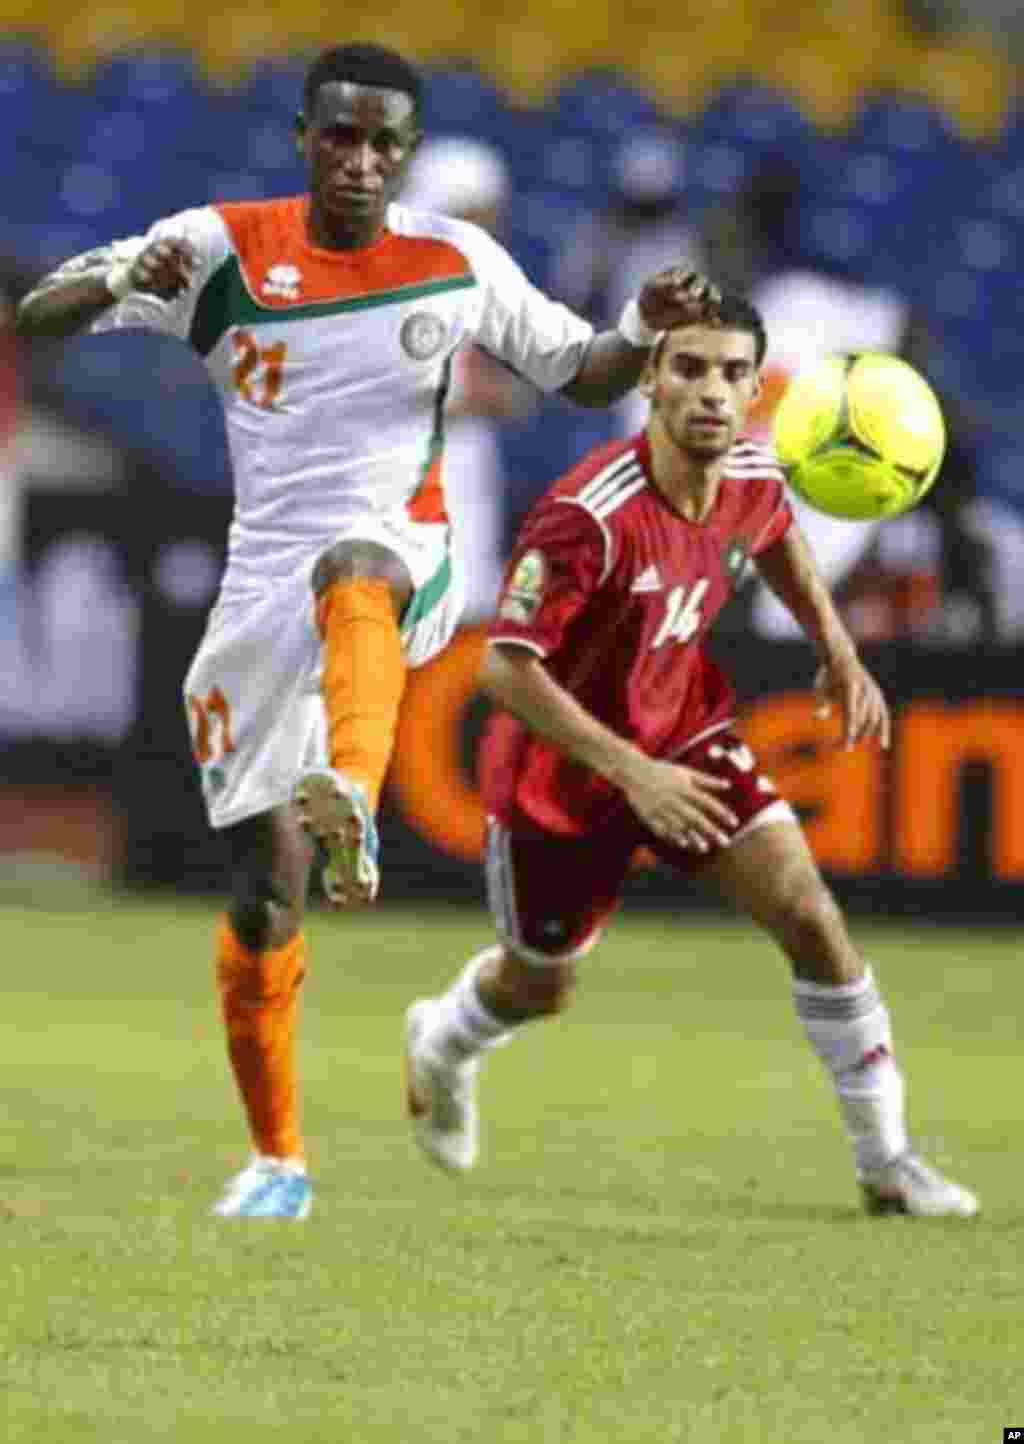 Niger's Seydou Ali Yacouba (21) plays against Morocco's Mbark Boussoufa (14) during their final African Cup of Nations Group C soccer match at the Stade De L'Amitie Stadium in Libreville, Gabon, January 31, 2012.